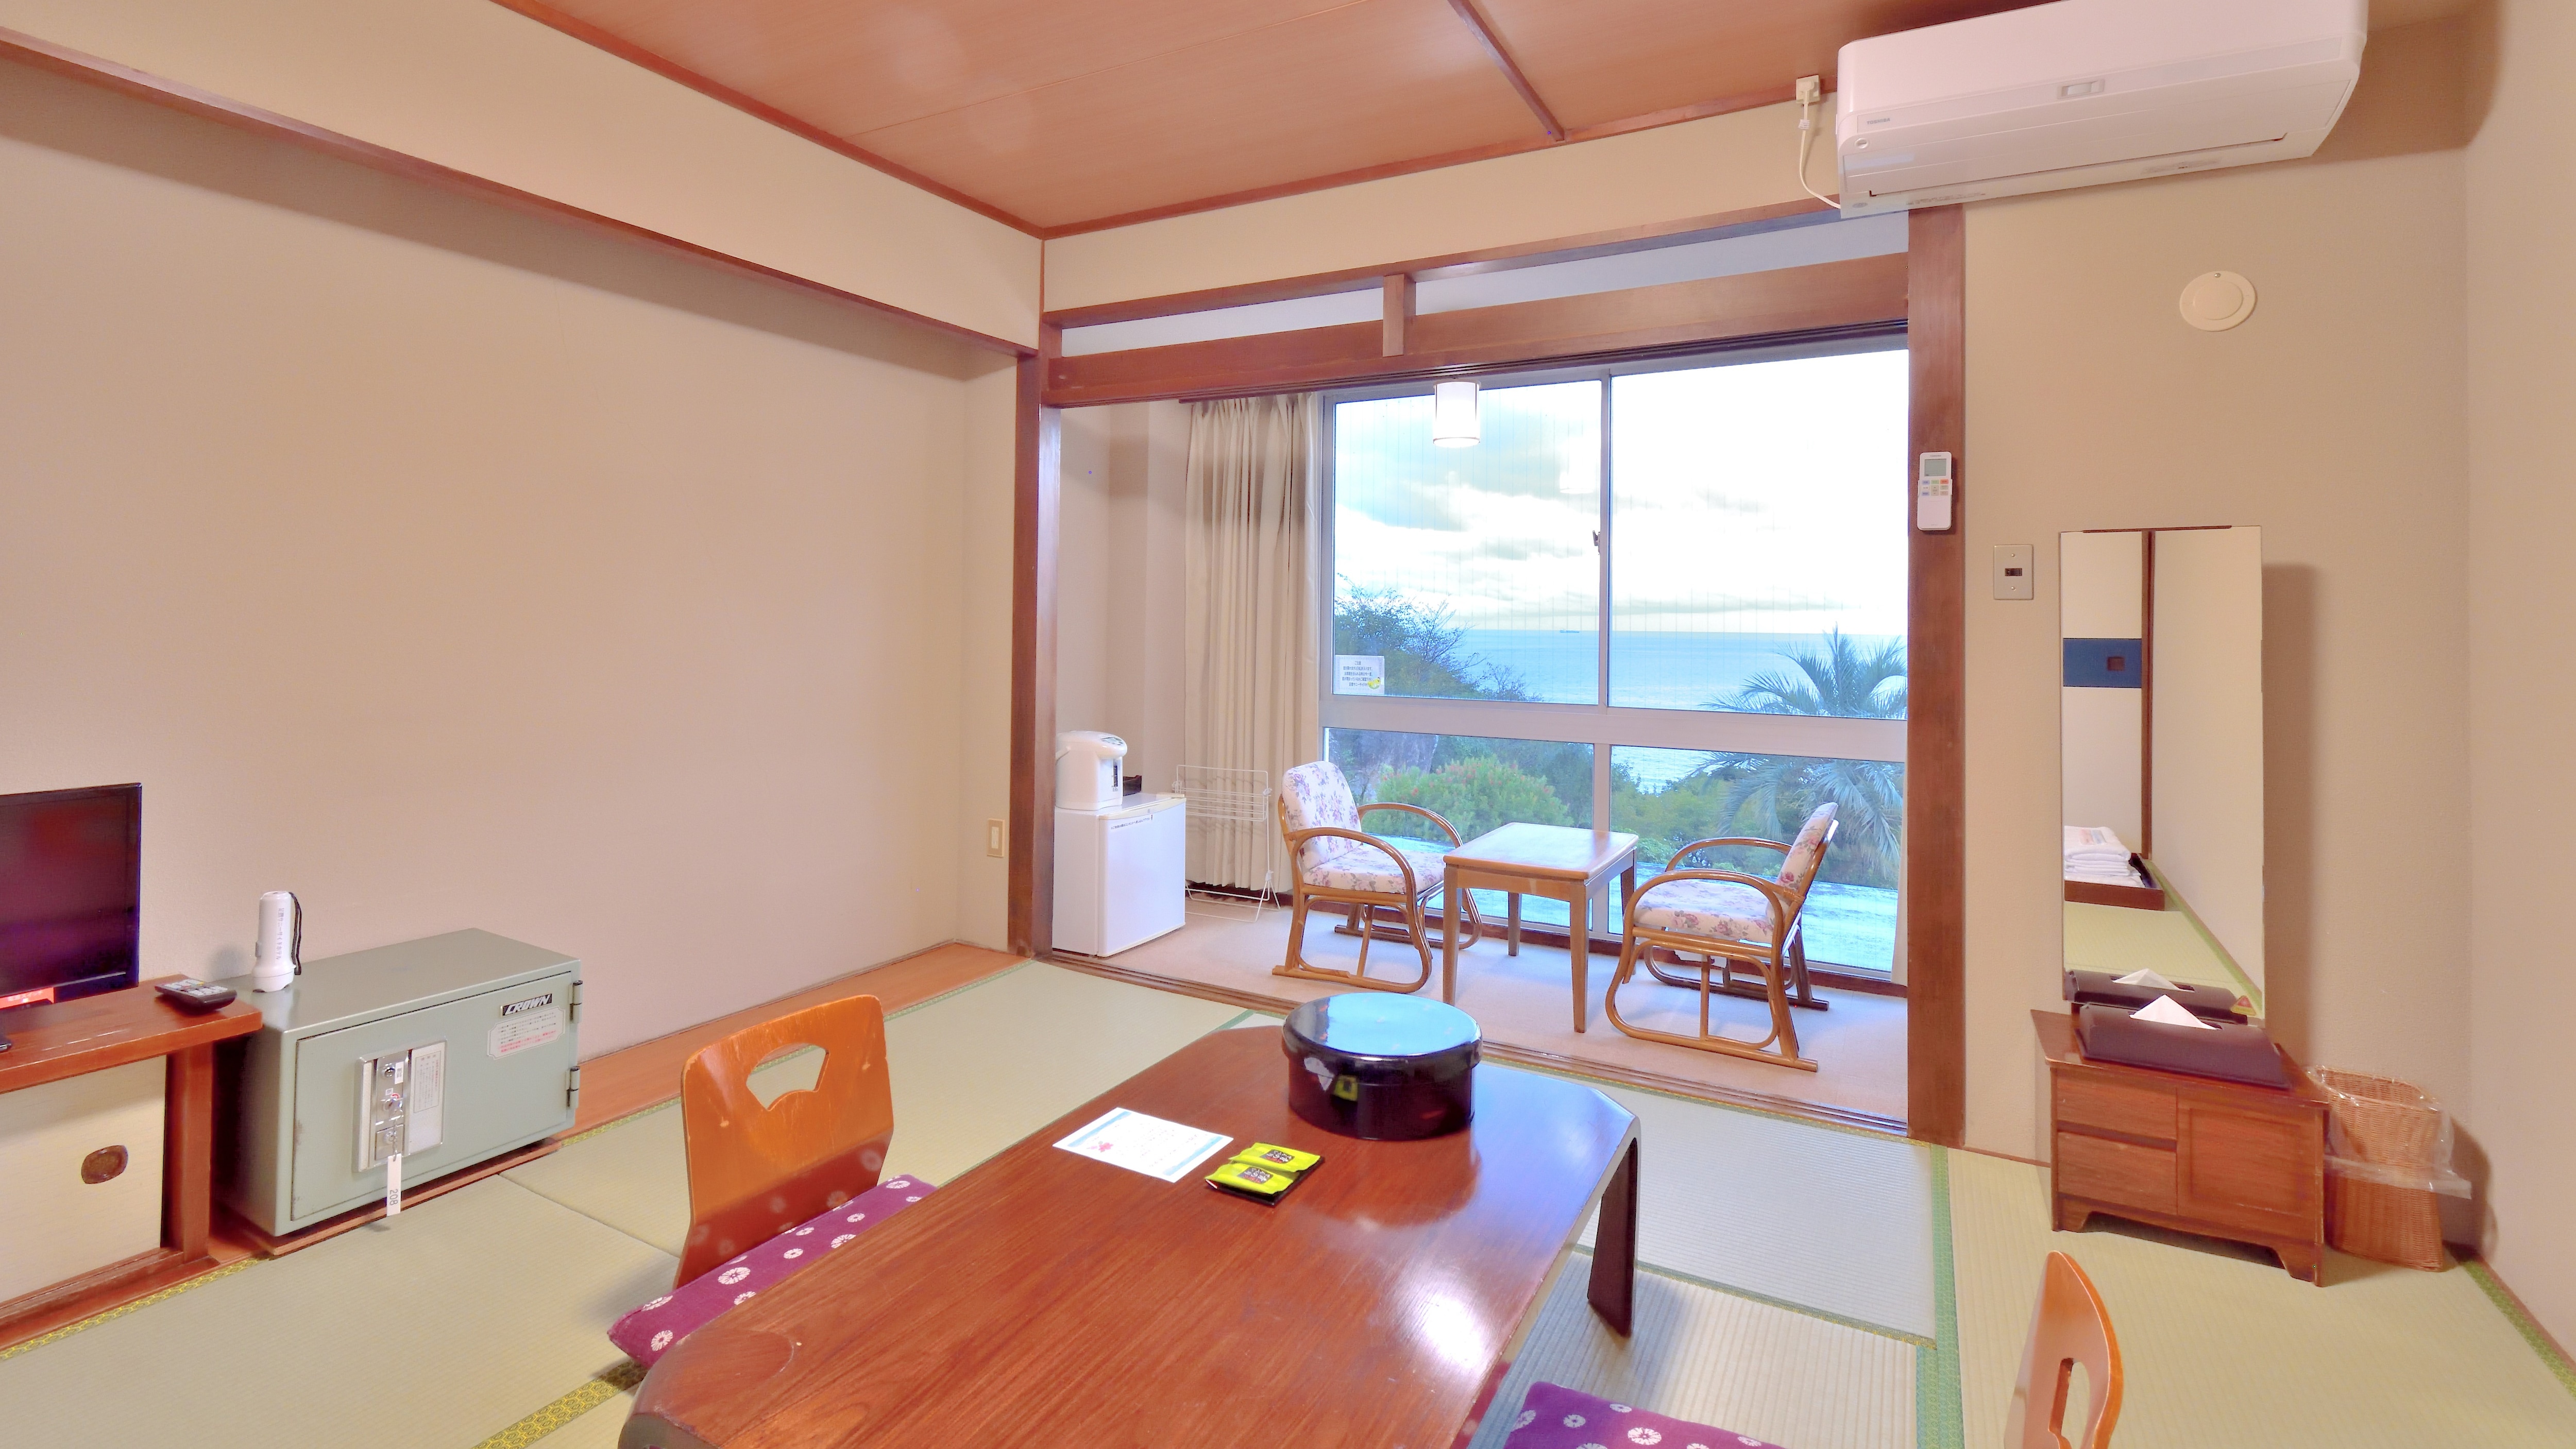 [Main building] Relaxing 8-10 tatami Japanese-style room overlooking the Pacific Ocean